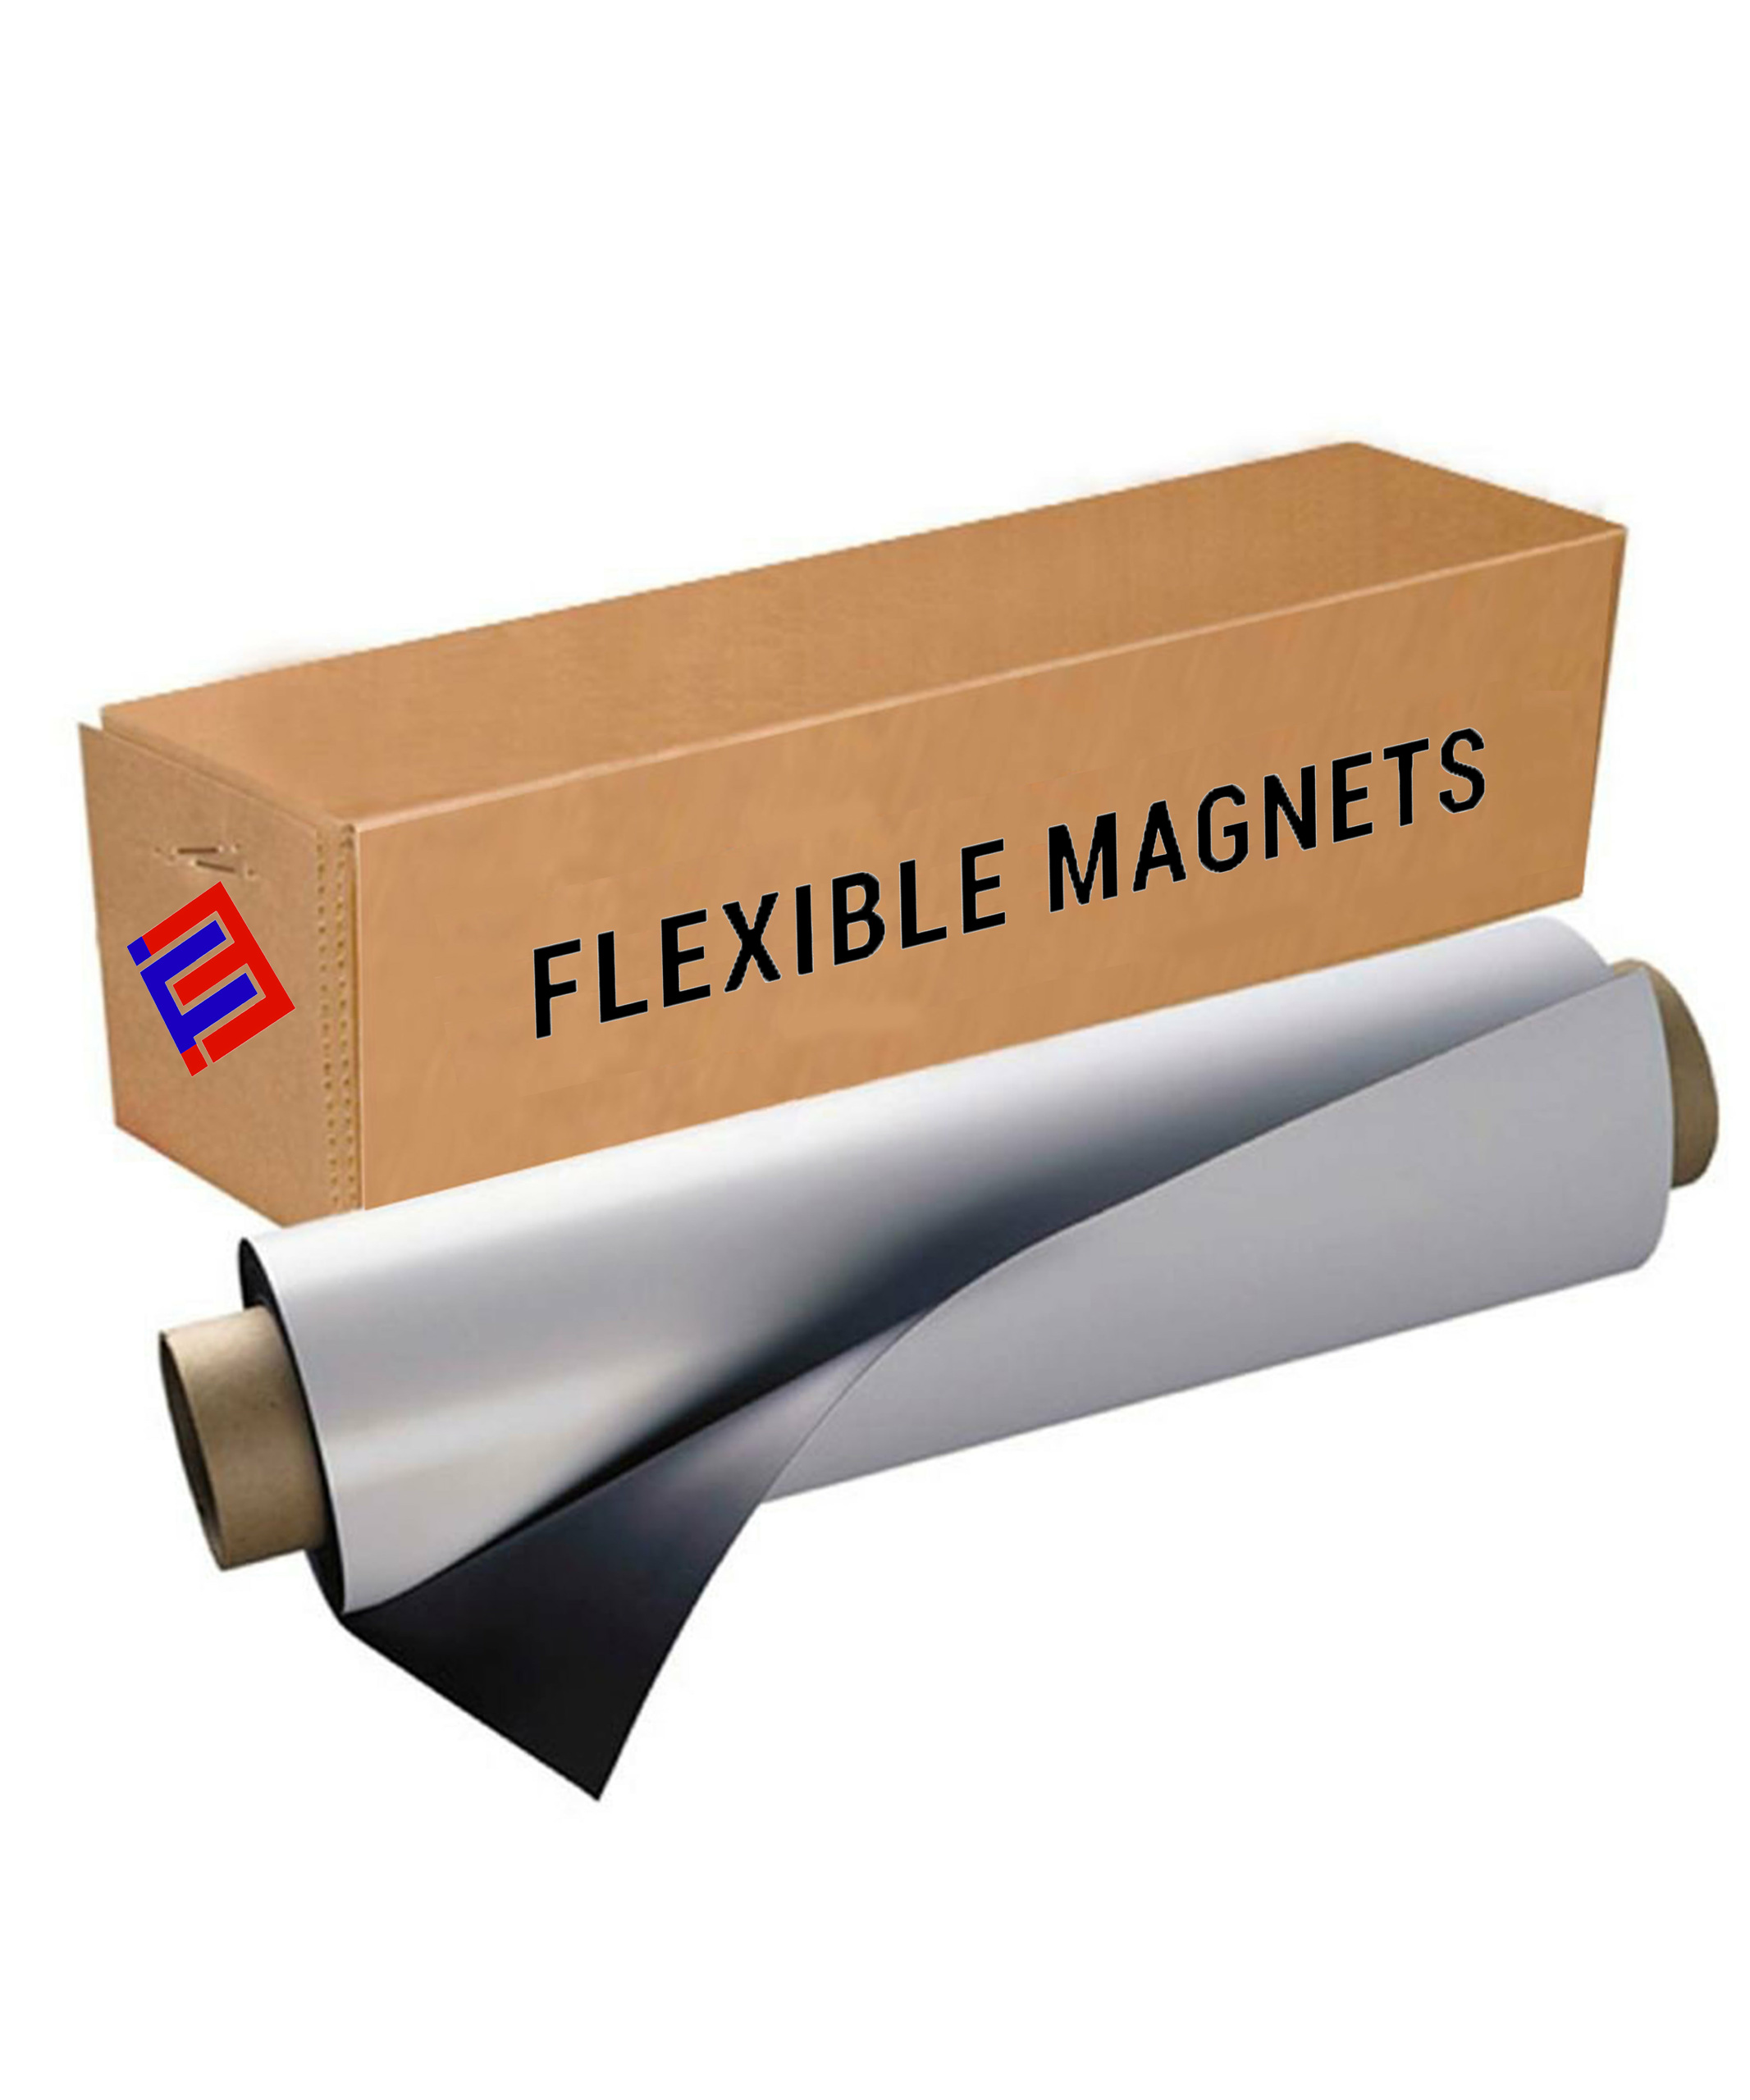 Flexible Vinyl Sheeting Roll Super Strong Many Sizes &Thickness Commercial Inkjet